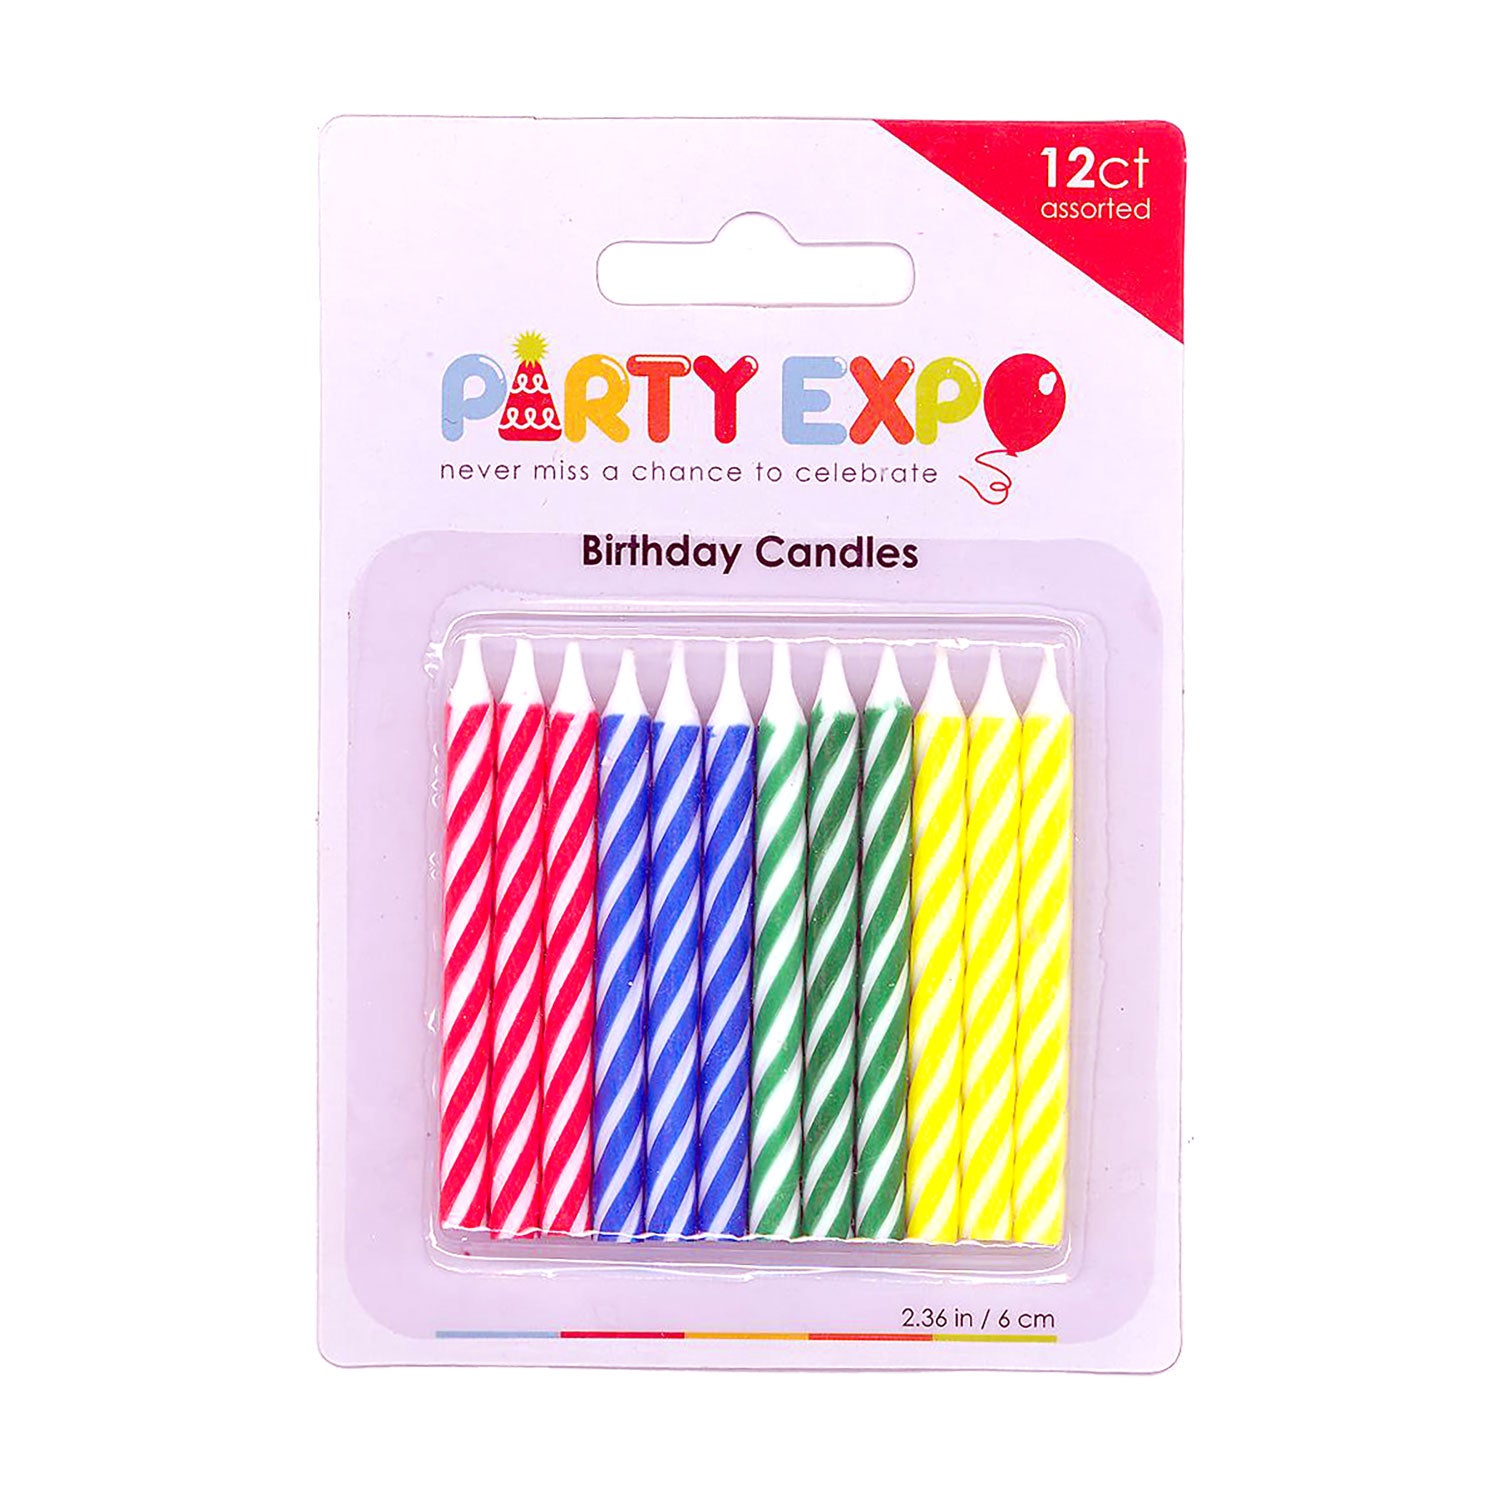 Birthday Candles, diagonal stripes primary color candles, small birthday candles, primary color theme birthday diy - gift expressions